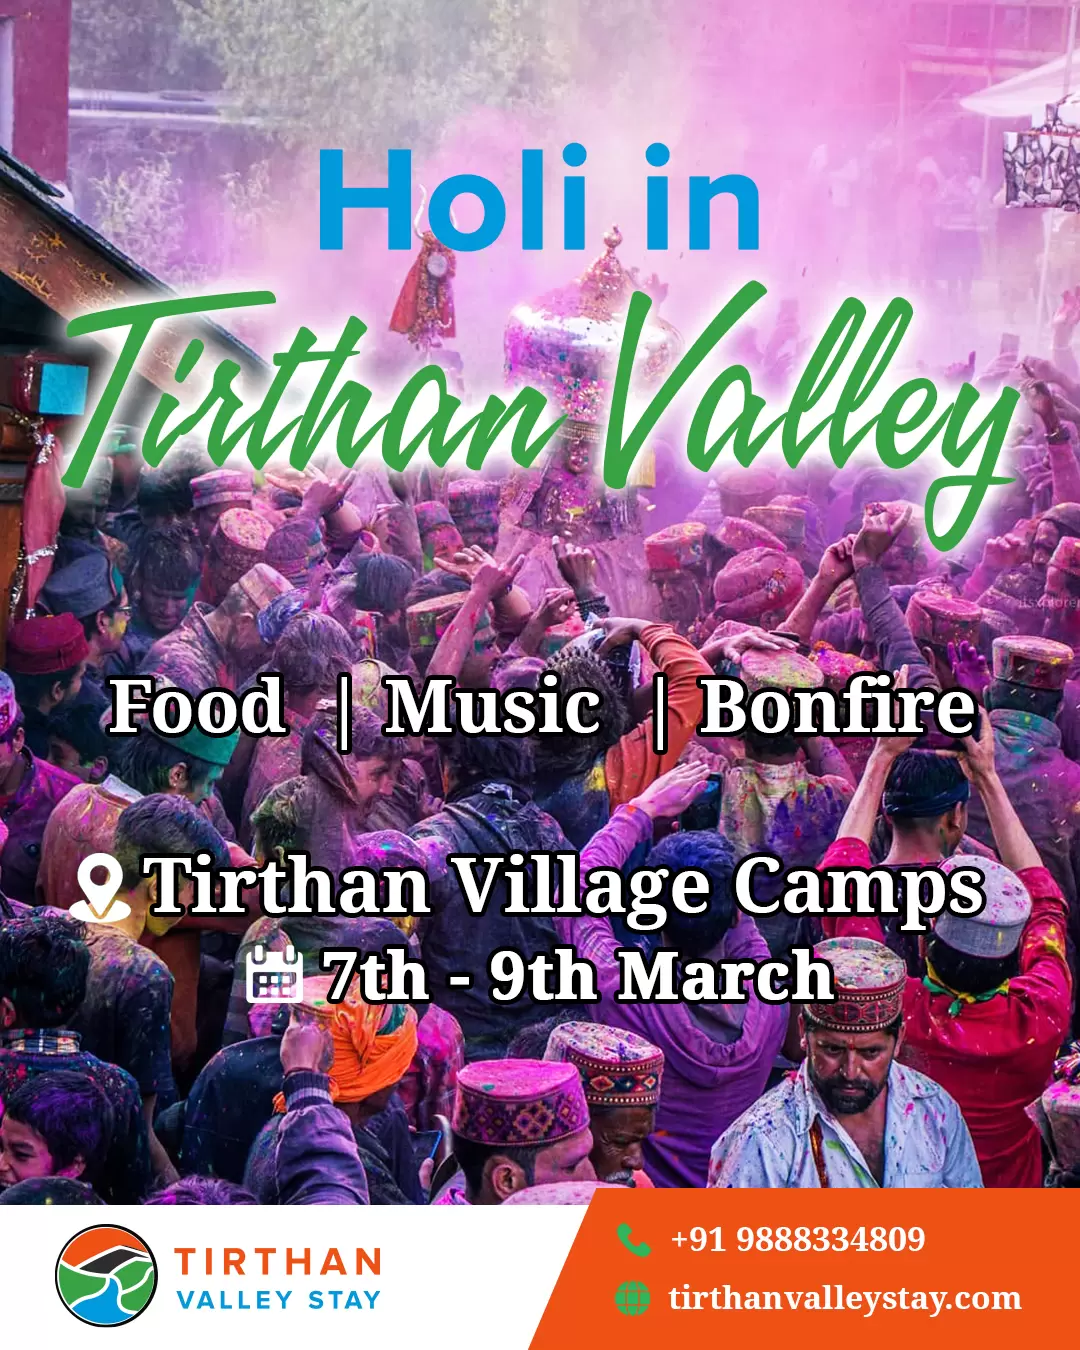 Holi In Tirthan Valley @at Tirthan Village Camps